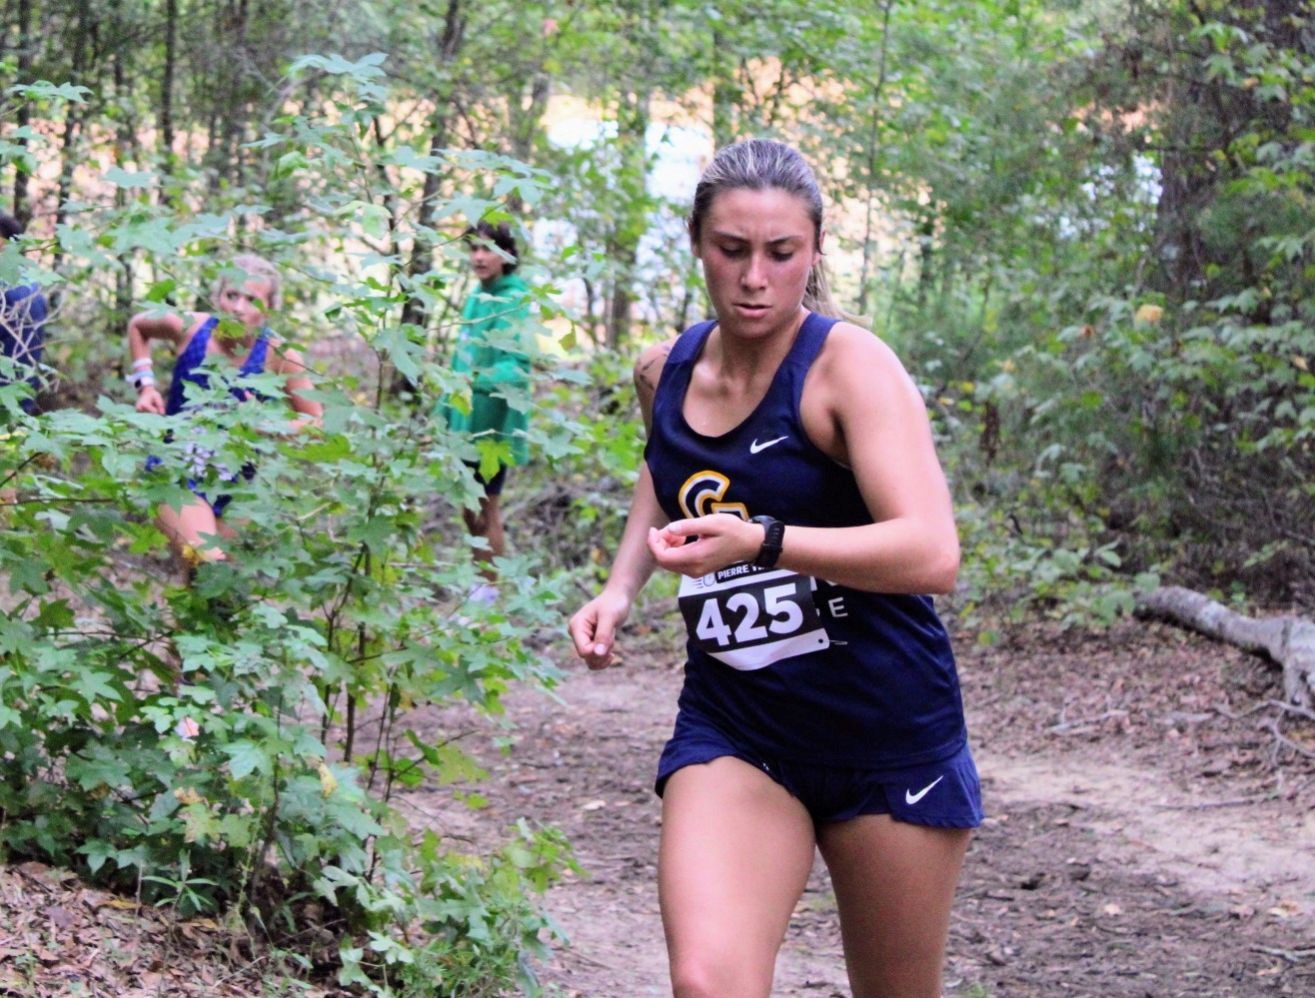 Gaston College freshman Abigail Presley has finished second for the Rhinos in both cross country meets this season.